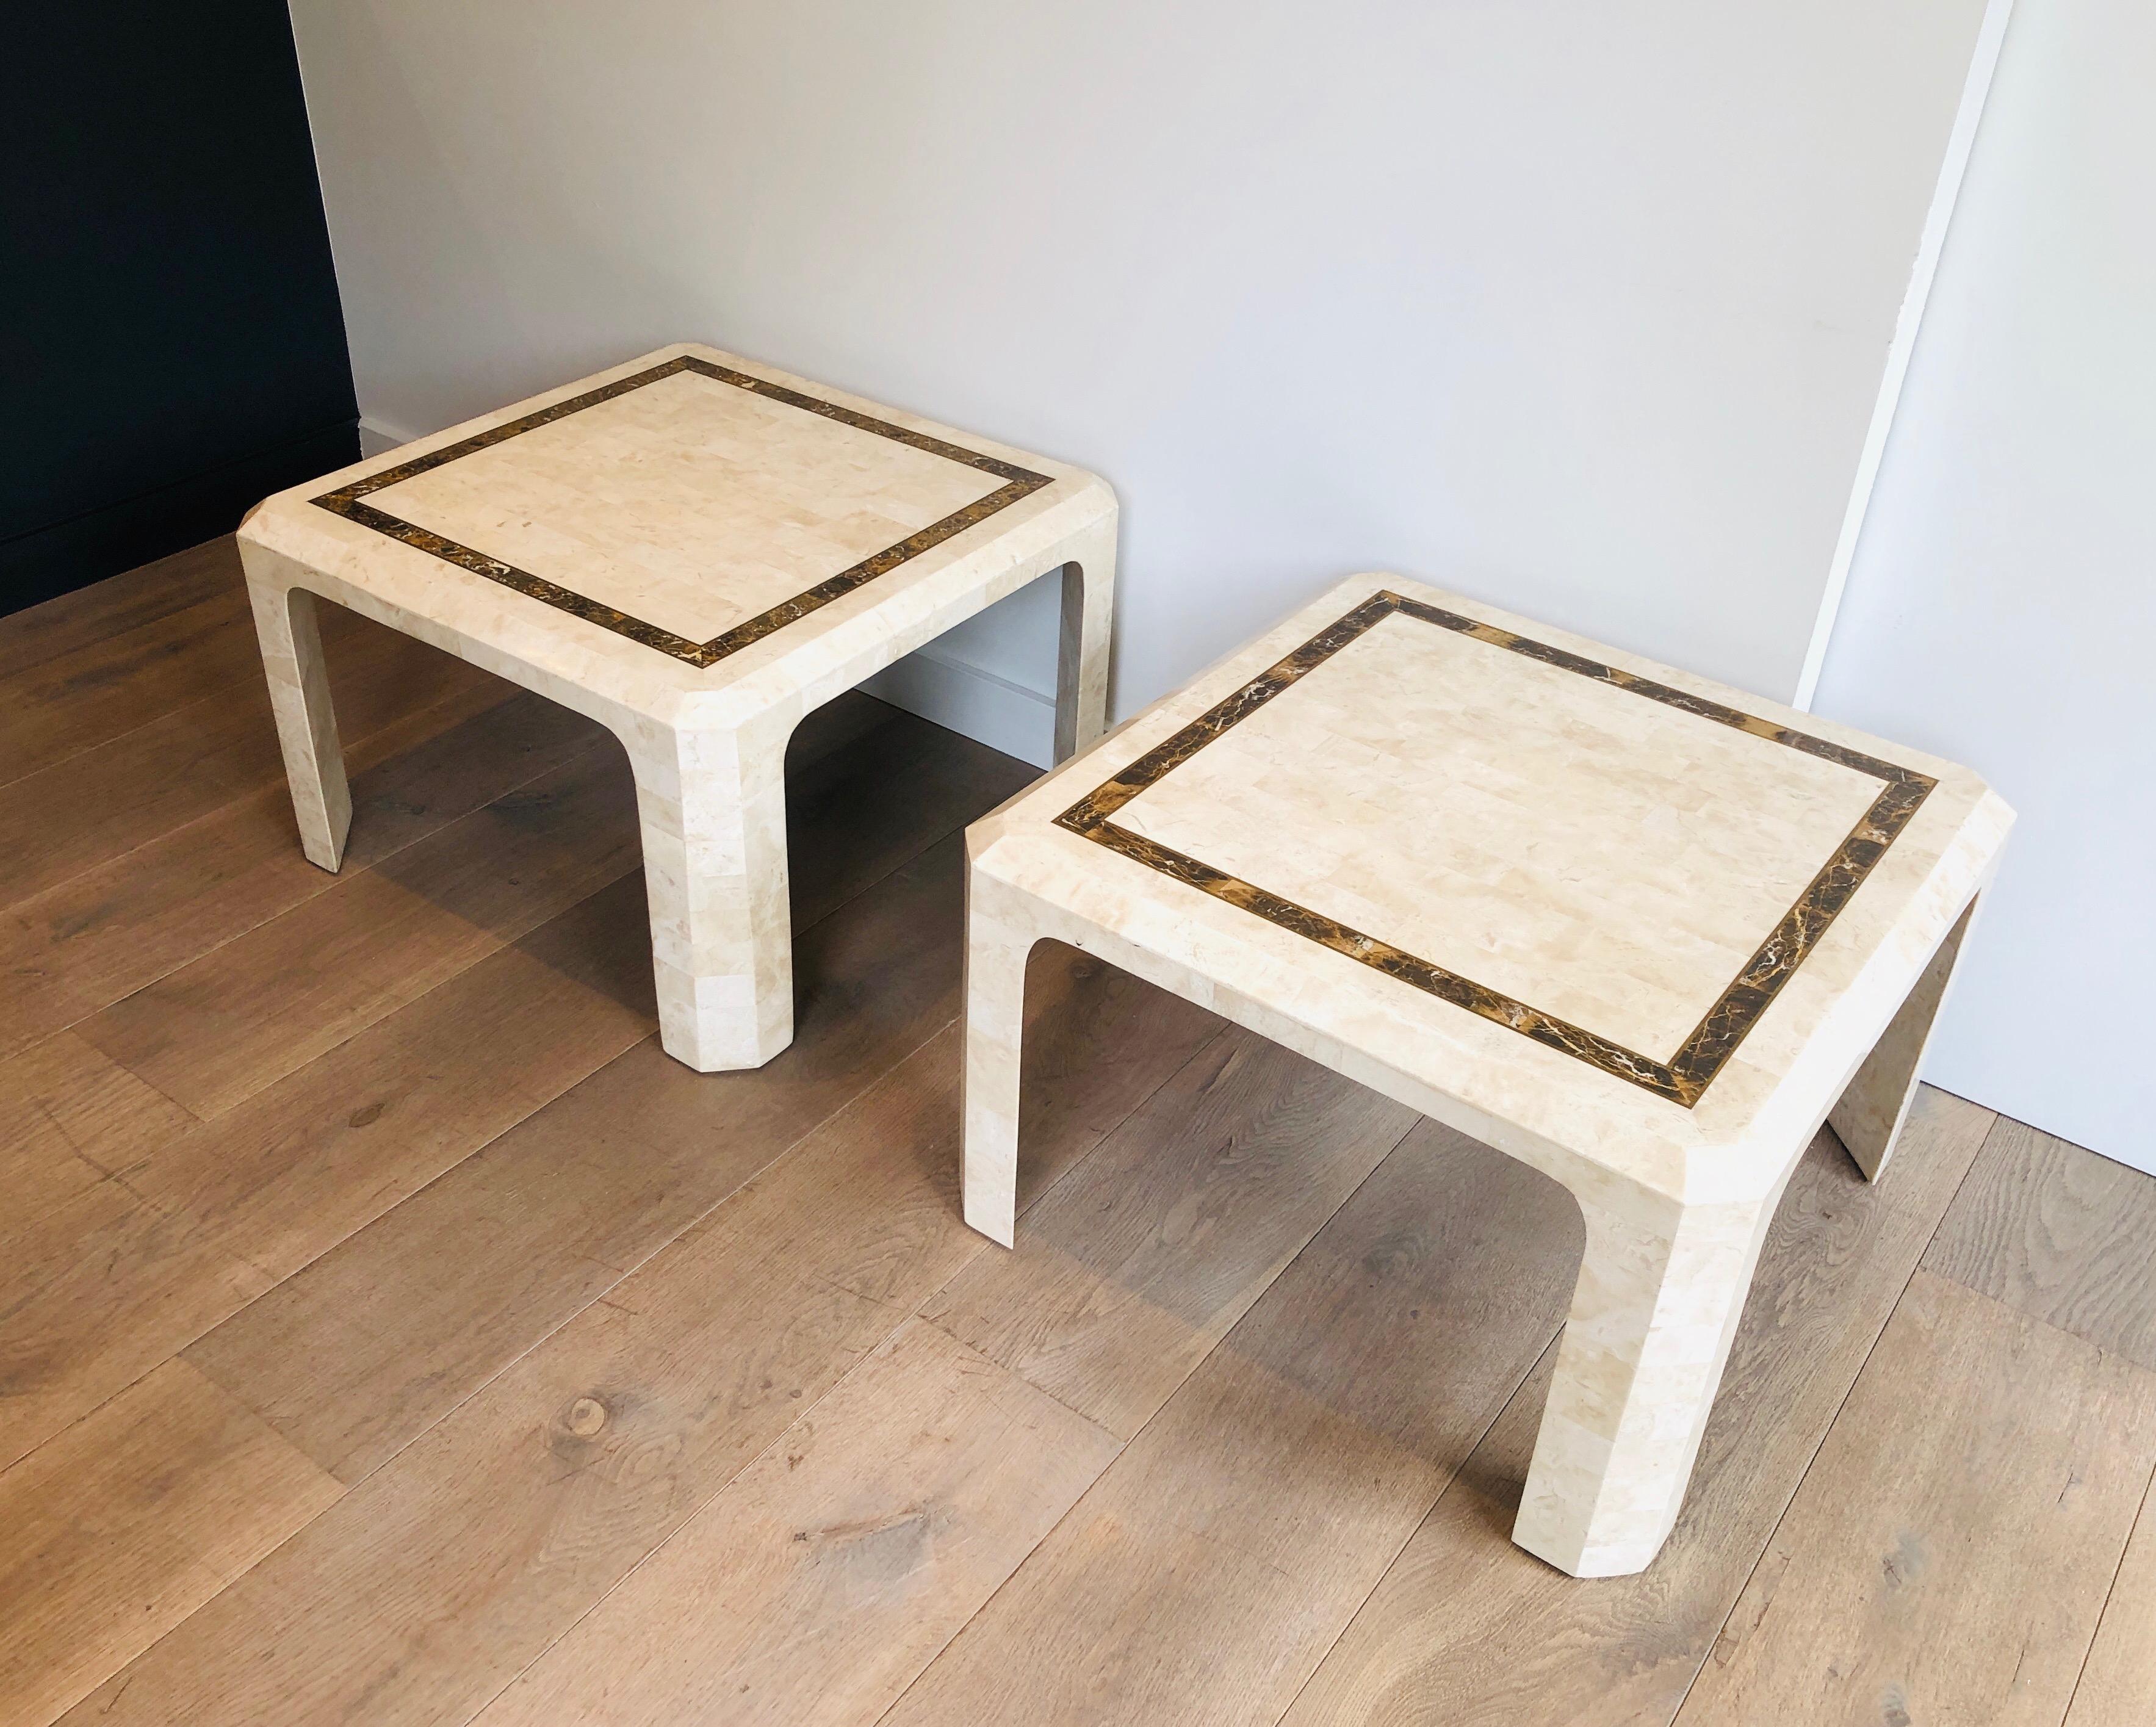 Pair of Marble Plates Side Tables with a Brass Line, French, Circa 1970 For Sale 15